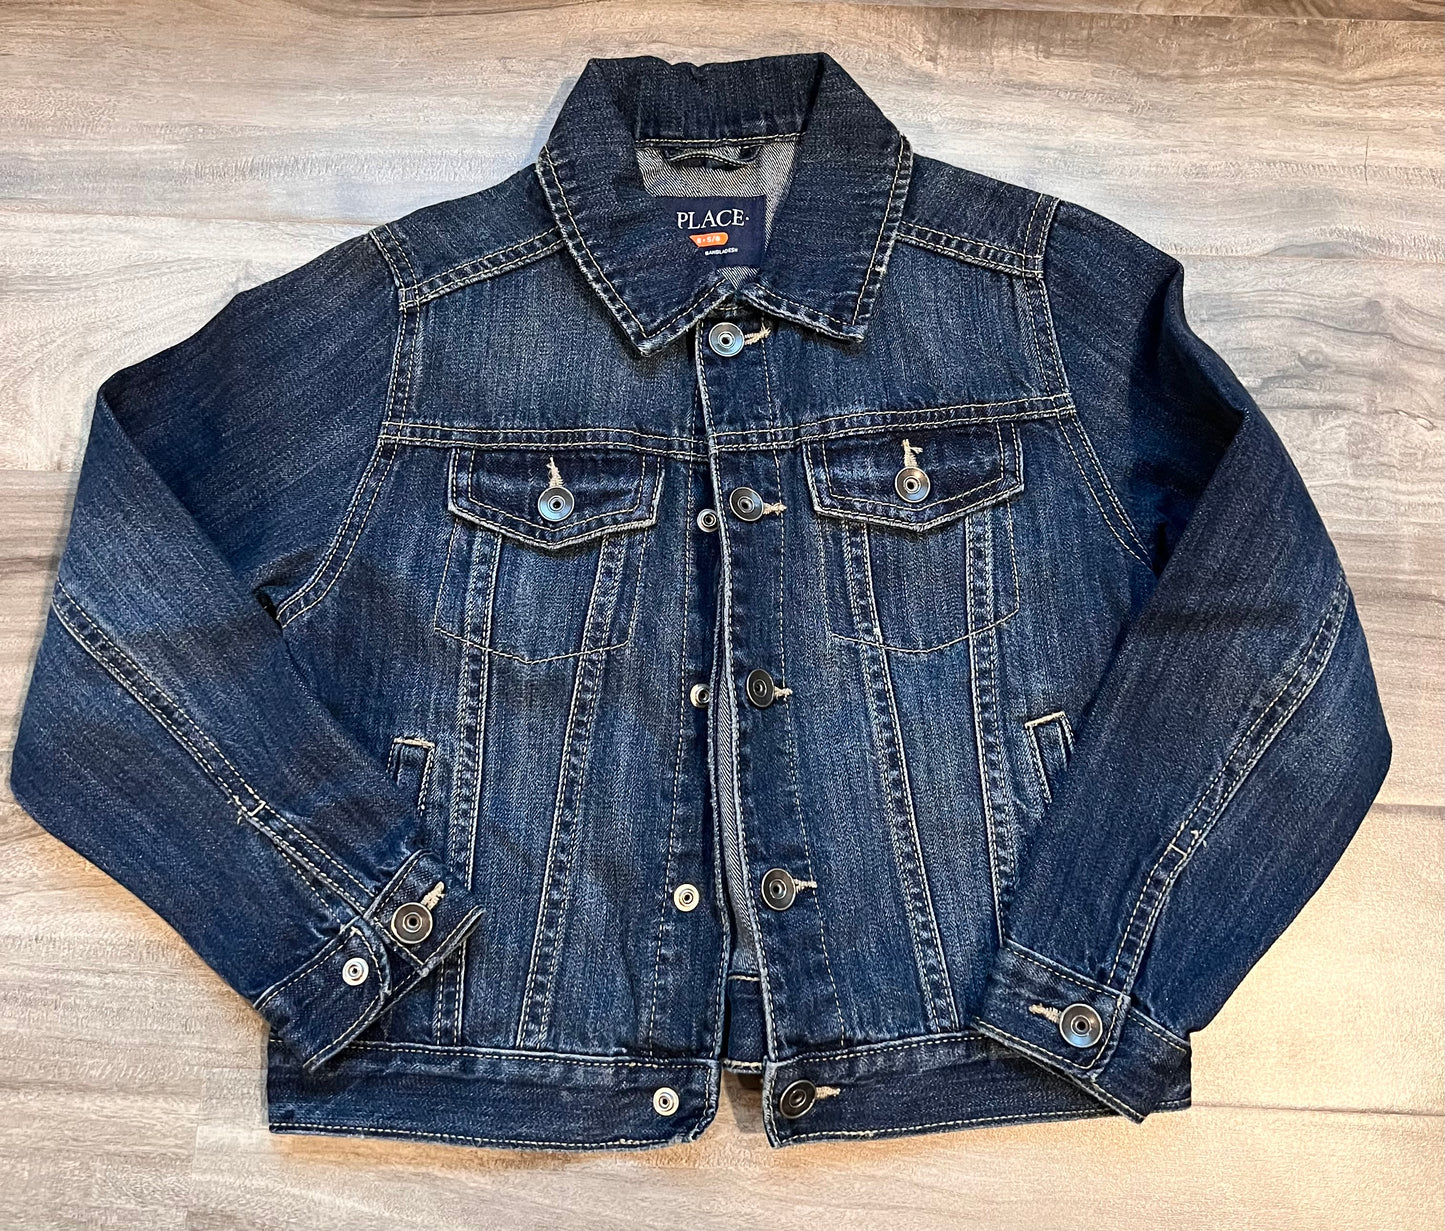 Youth Boy (OR Girl) 5/6 - Childrens Place Denim Jacket